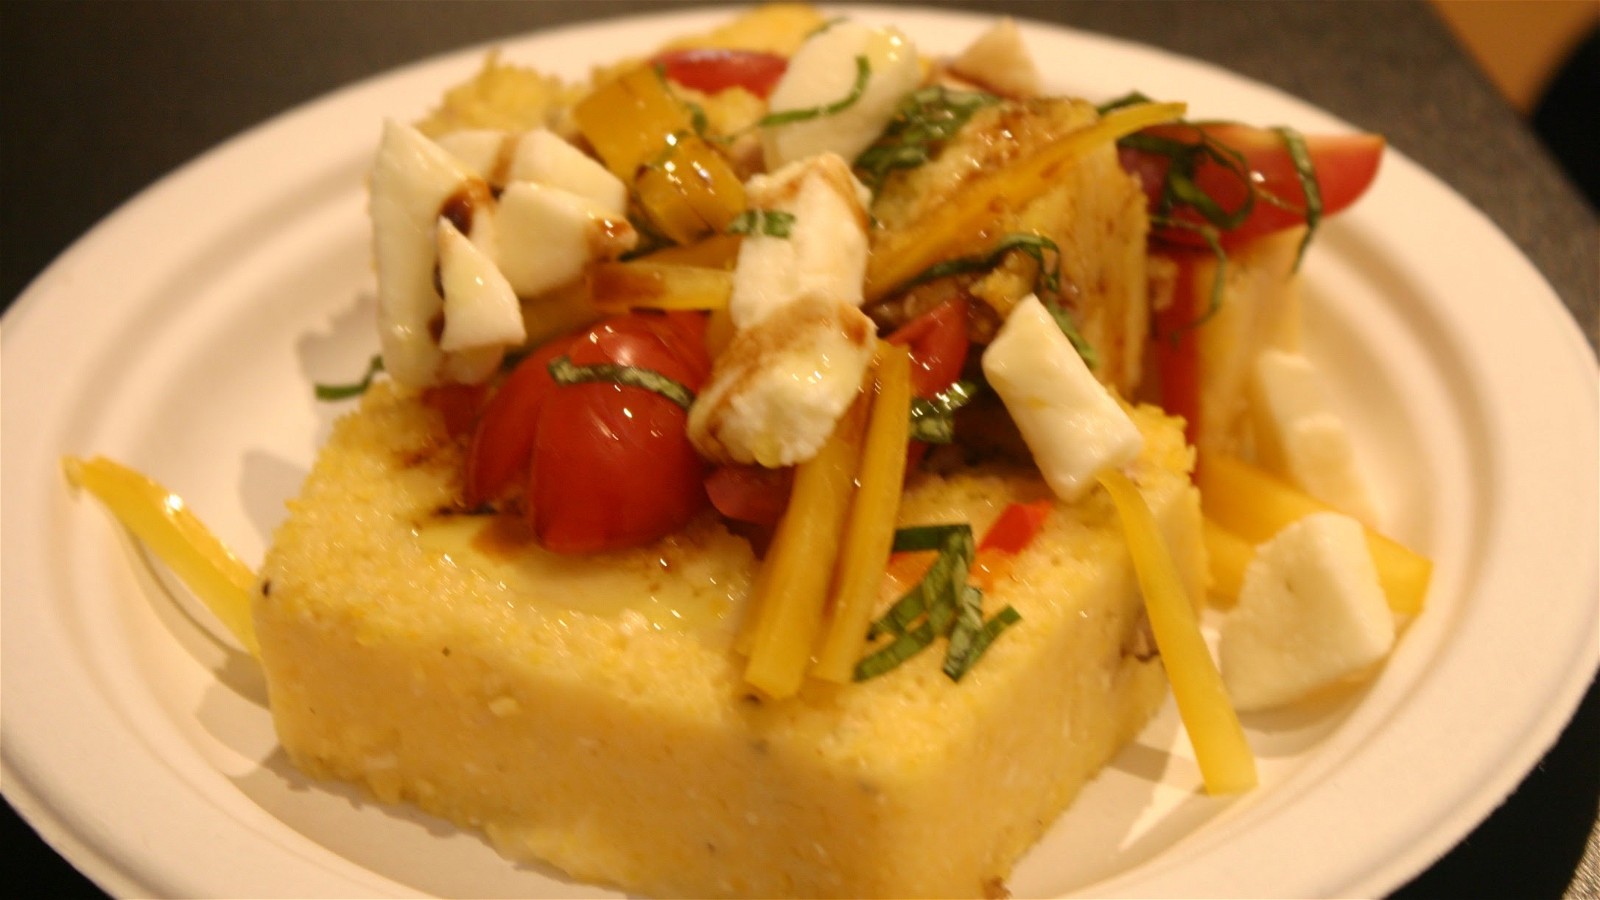 Image of Warm Terrine of Sausage, Peppers and Polenta